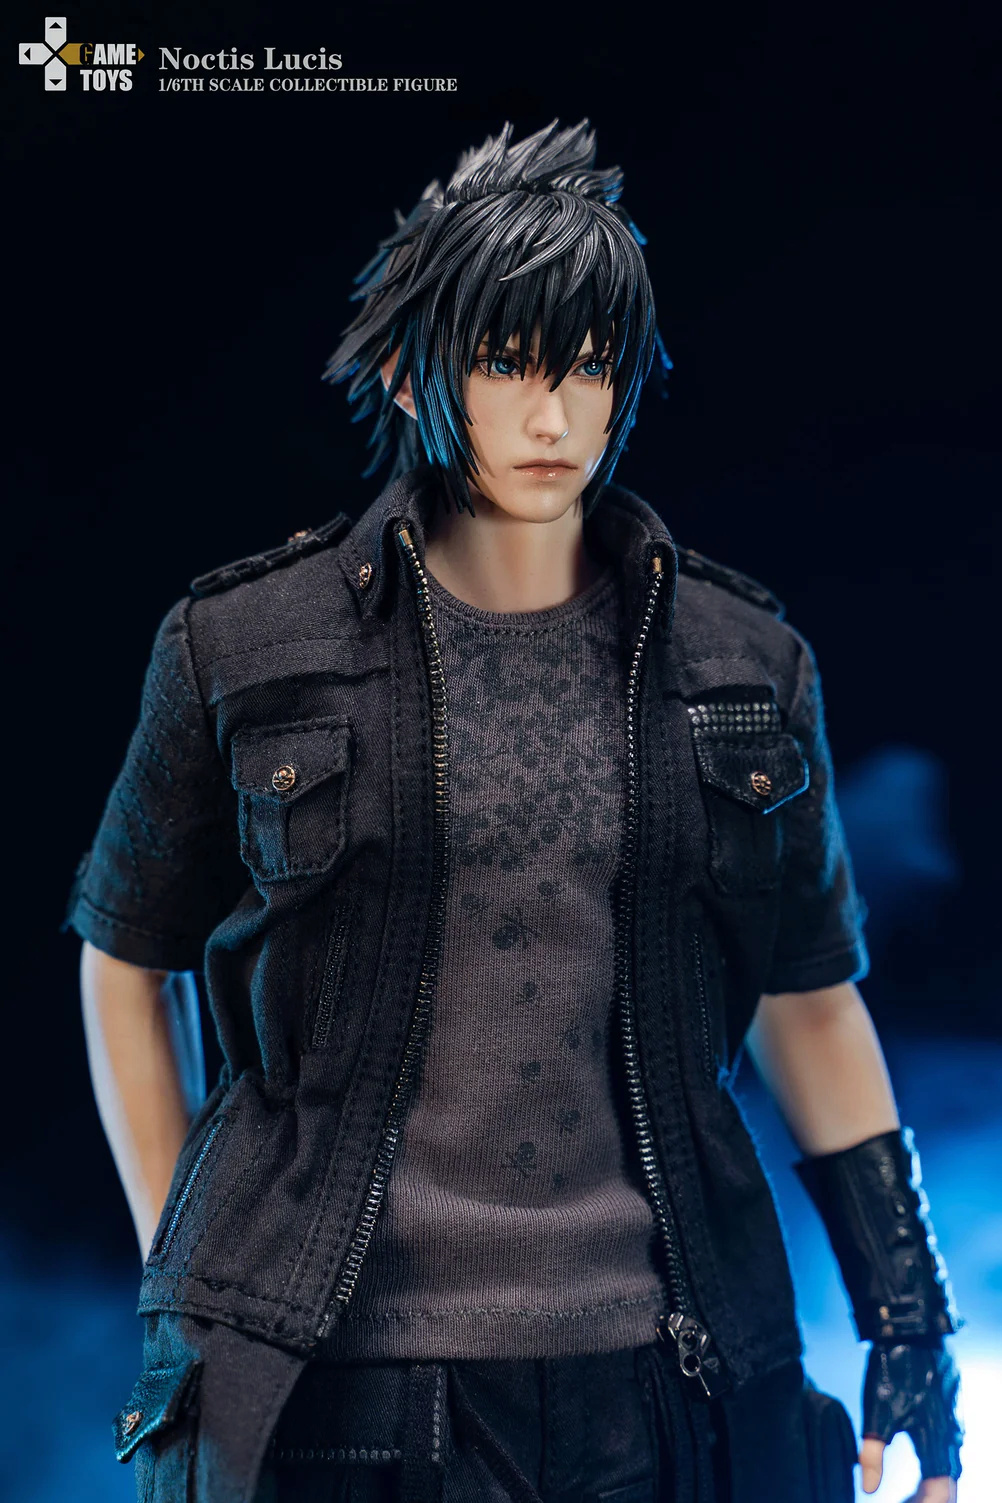 GameToys - NEW PRODUCT: Gametoys Noctis Lucis, additional accessories, and throne 20_web10